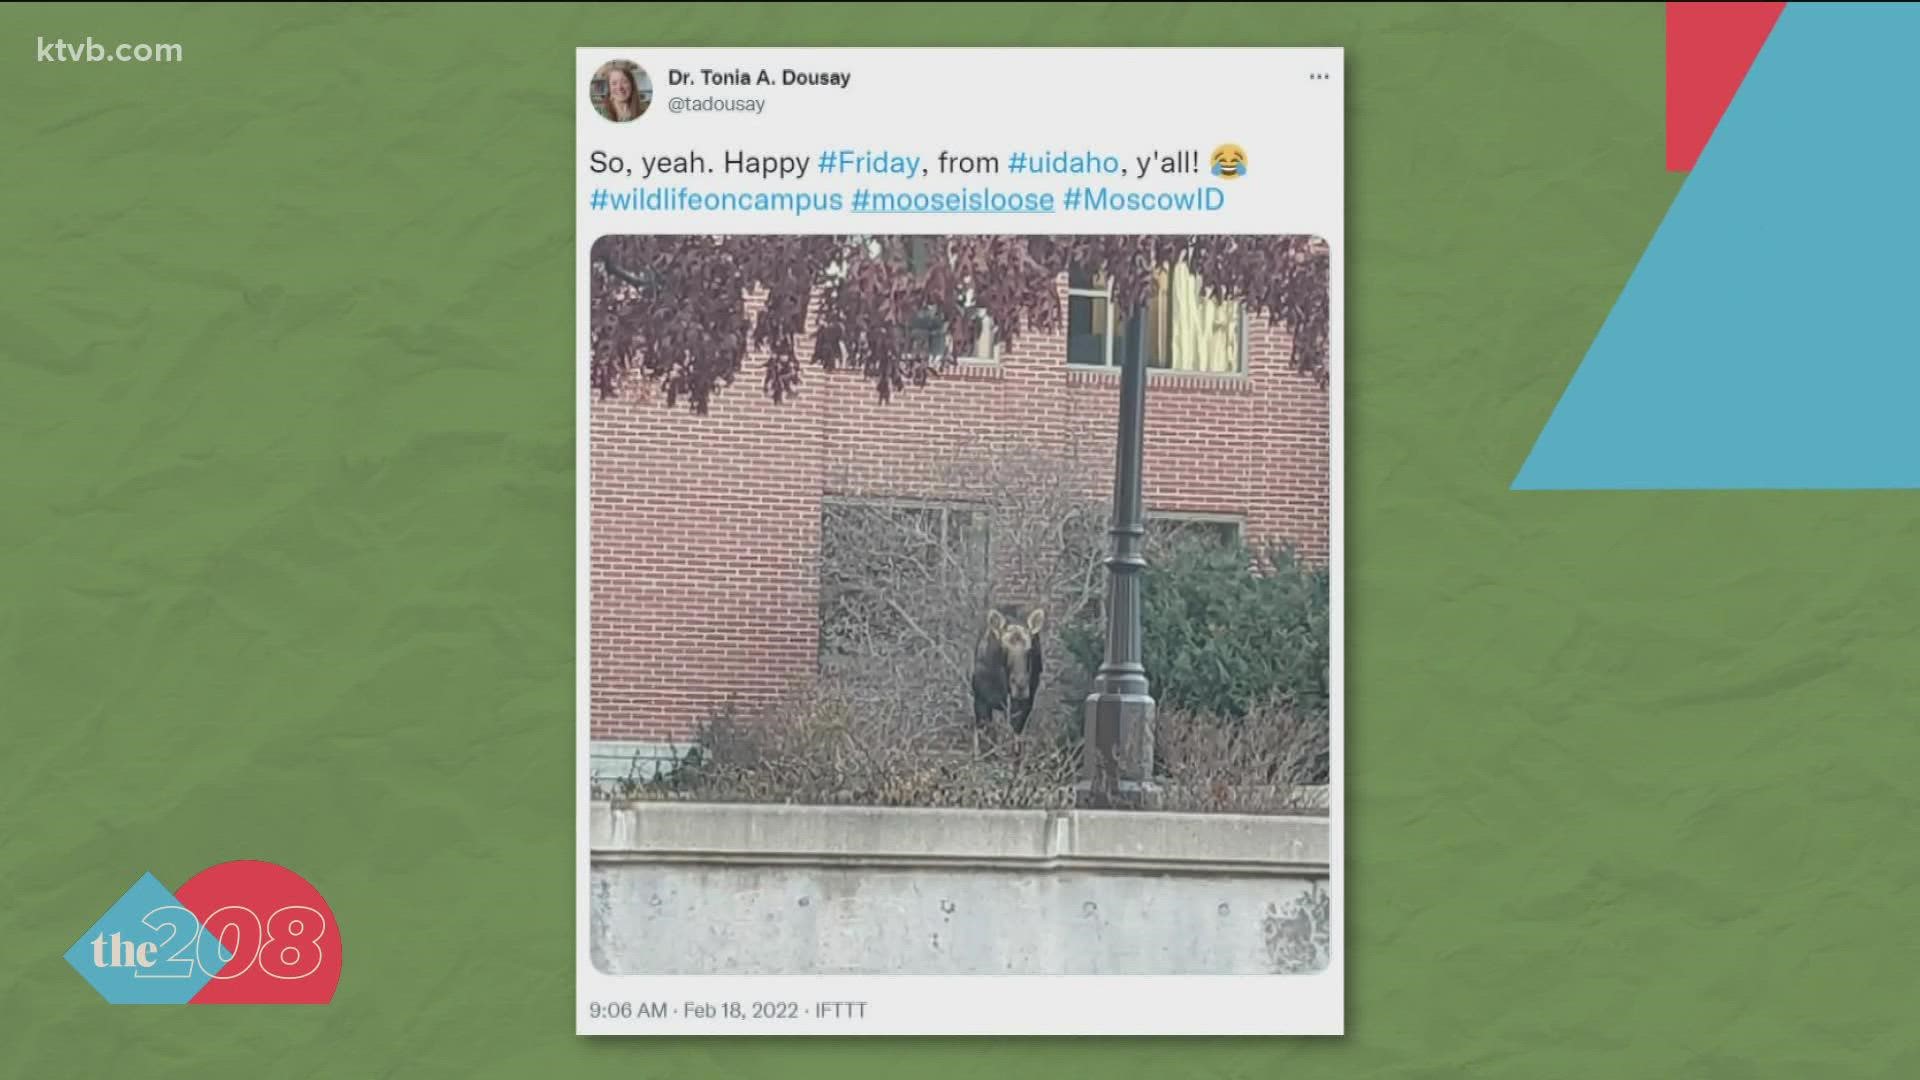 College students and staff in Moscow received a unique alert from the University of Idaho Friday morning, warning that a moose was loose on the Palouse campus.